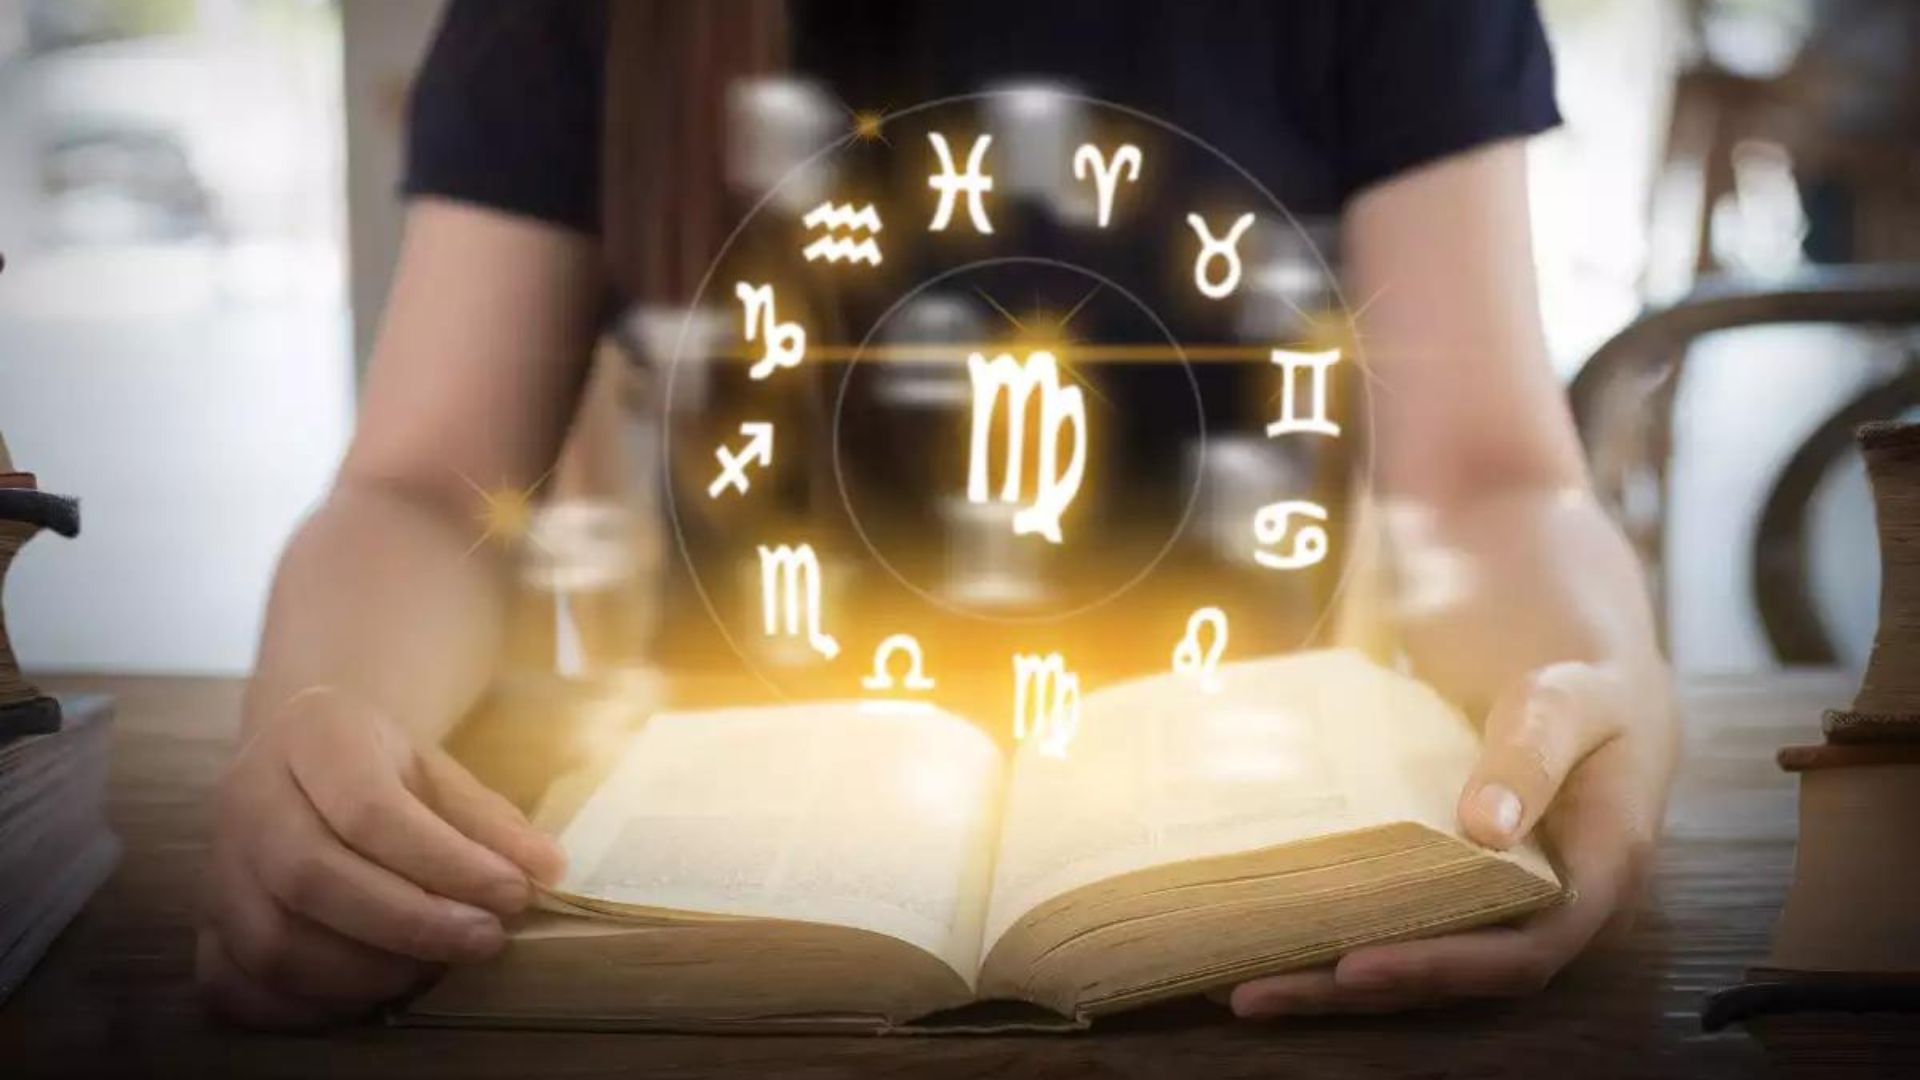 A person with an open book and a hologram of zodiac signs on a wheel.